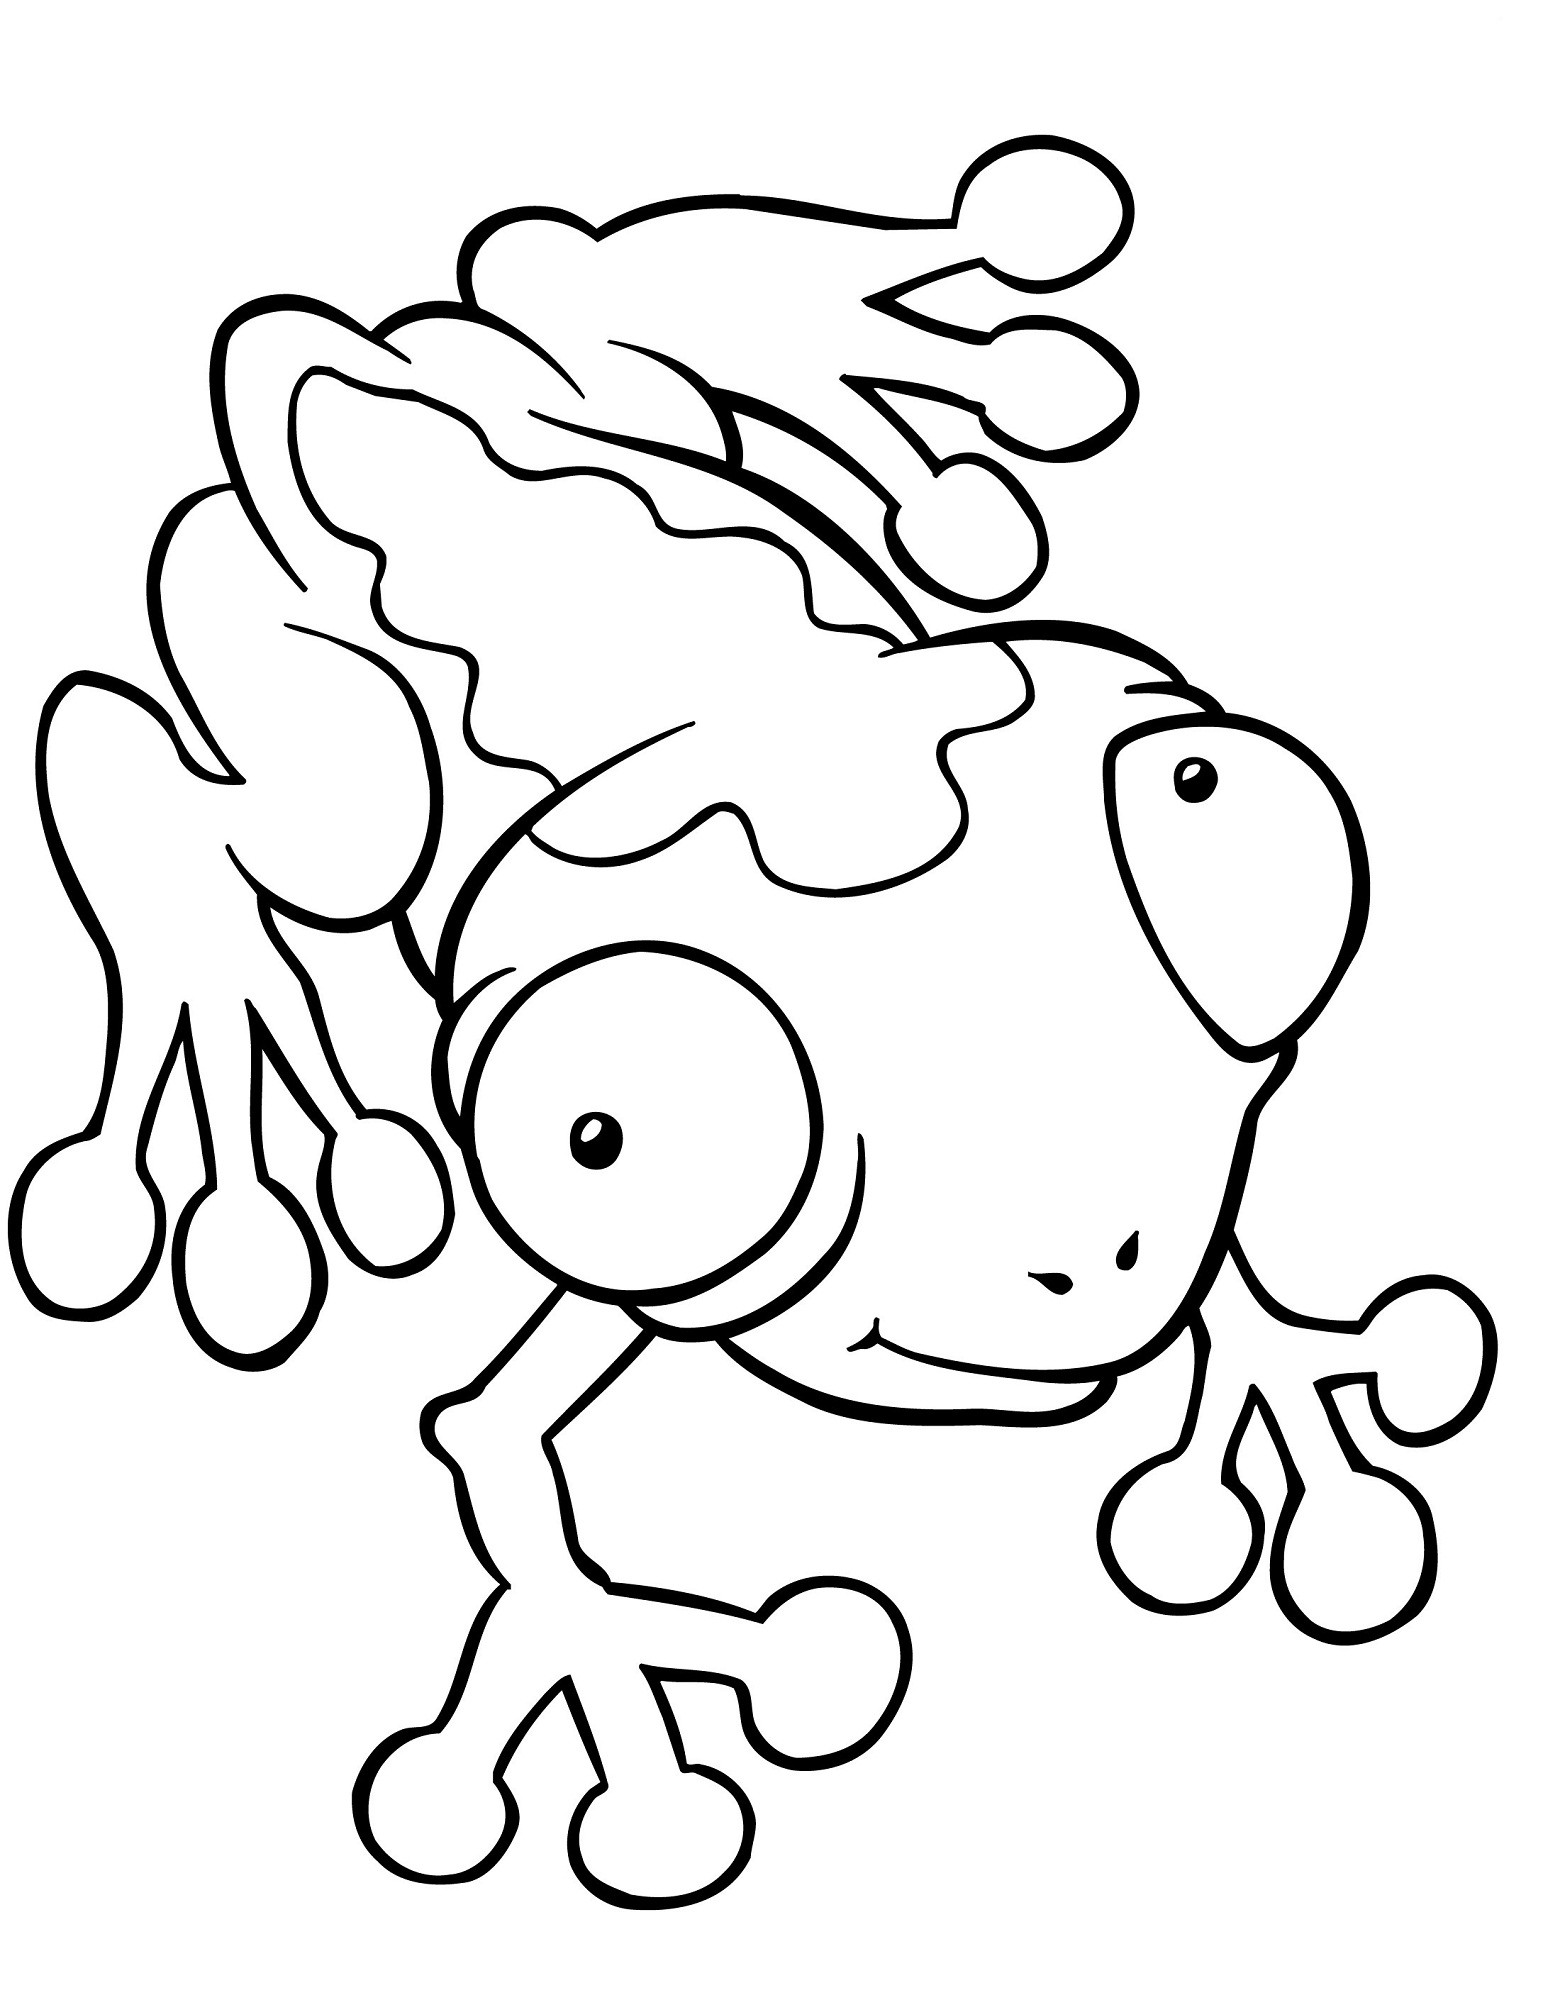 Frog Coloring Pages For Kids
 Frog Color Pages for Kids